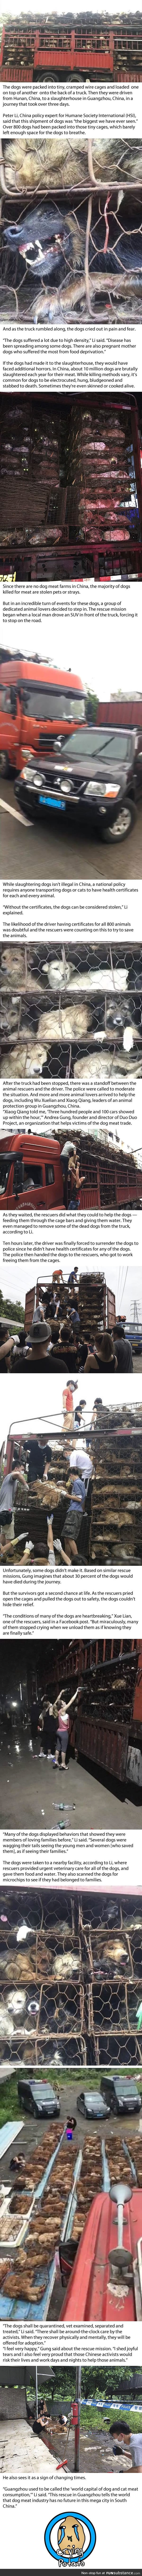 800 dogs rescued from dog meat truck that headed to yulin festival